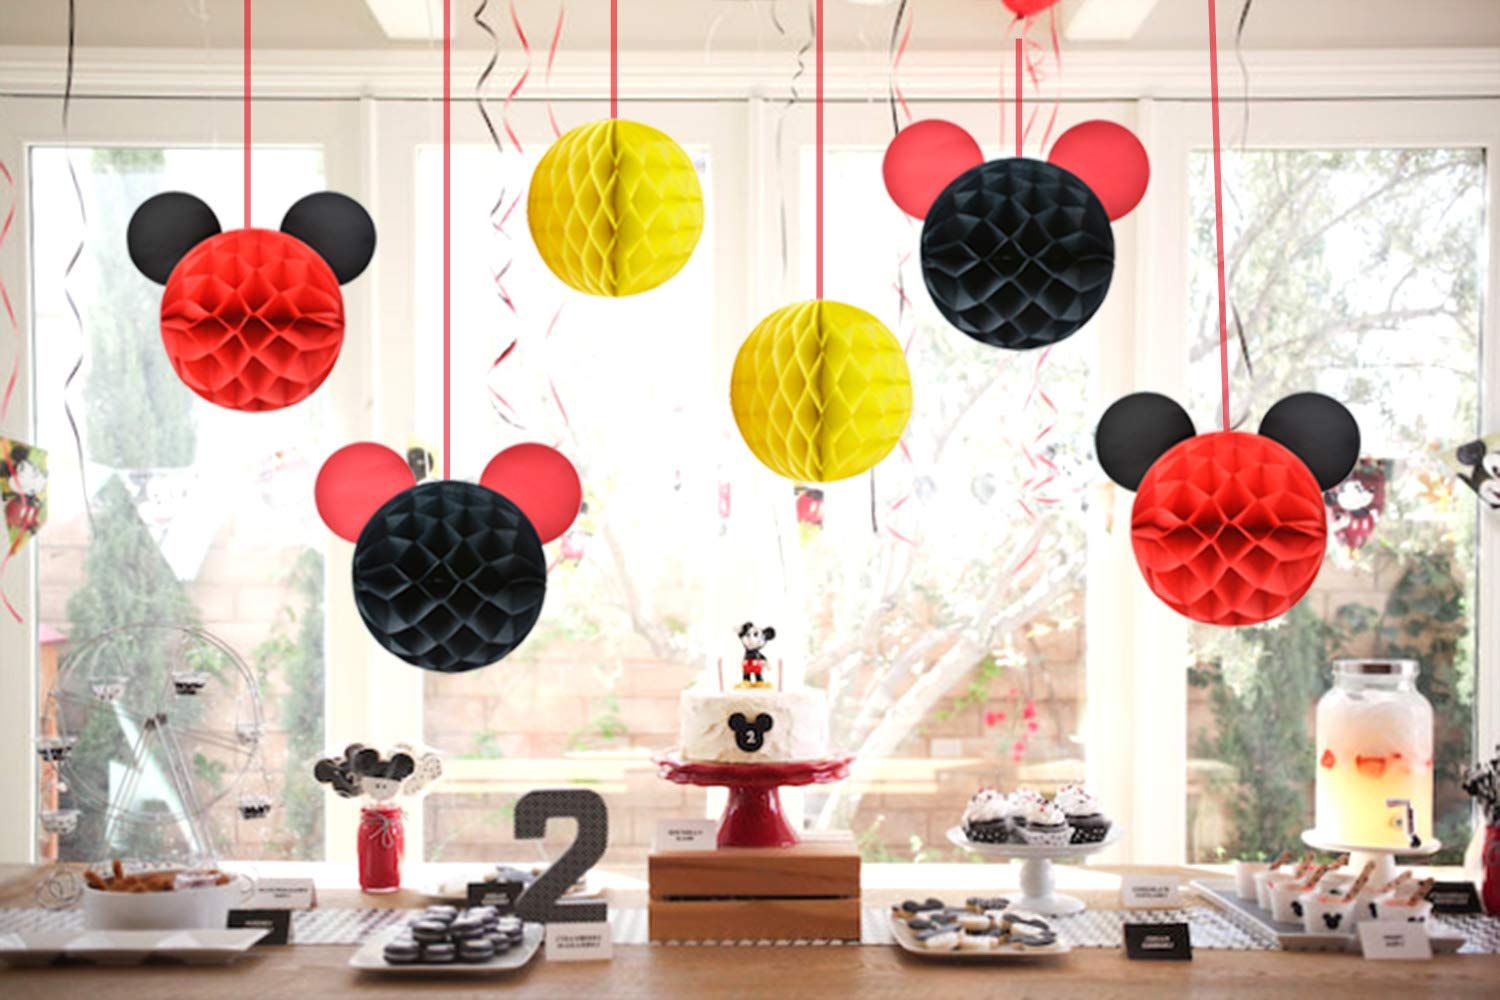 Mickey Mouse Birthday Decorations : Target